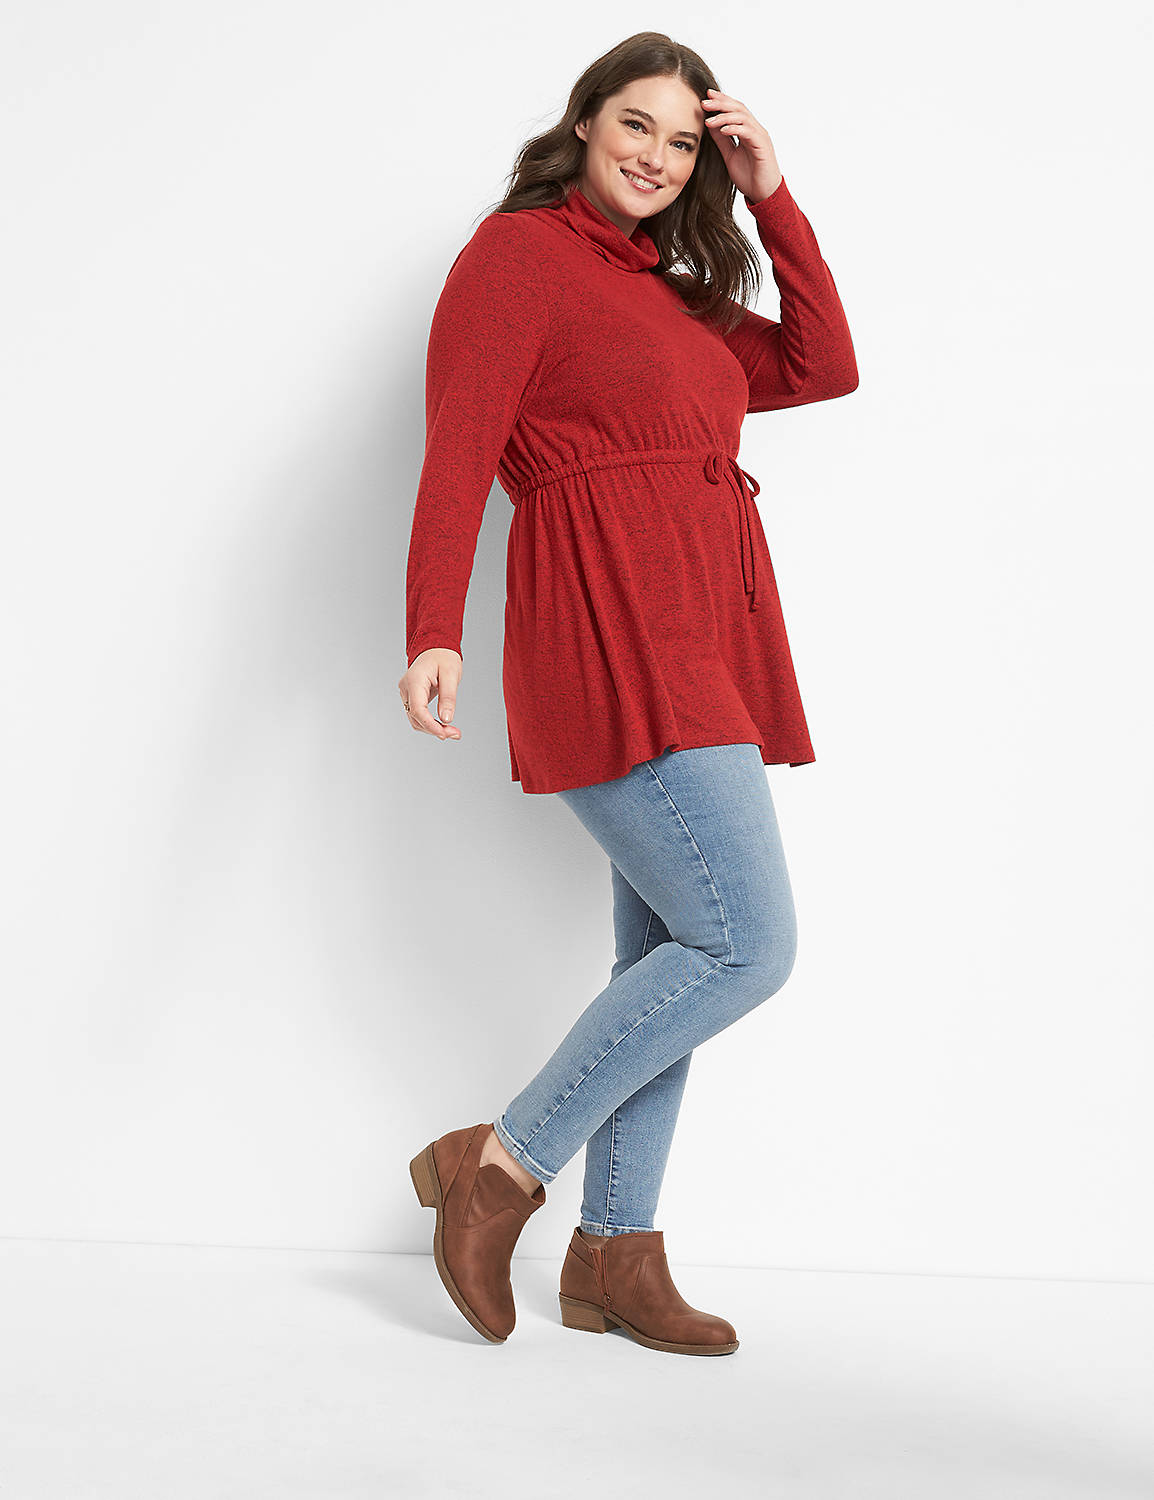 Long Sleeve Funnel Neck Drawcord Tunic In Solid Hacci 1123736:PANTONE Haute Red:10/12 Product Image 3